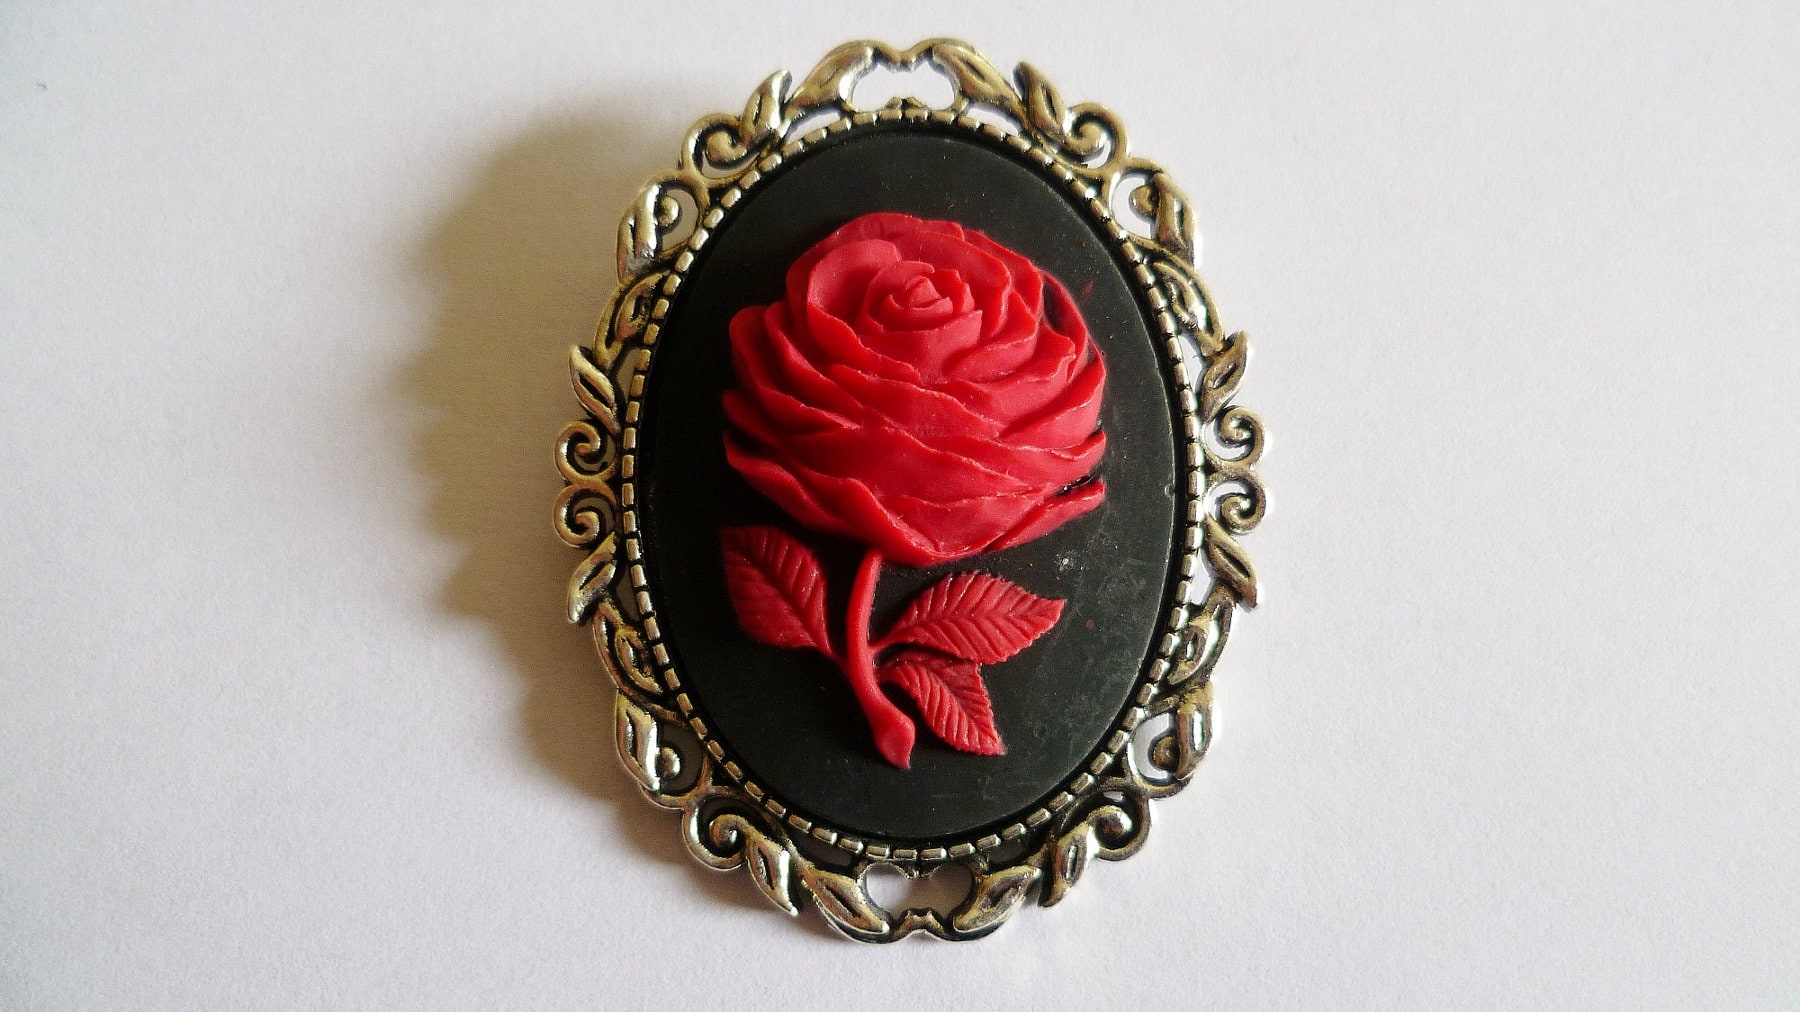 Yuehao Brooch Rhinestone Accessories Brooch Rose Flower Clothing Red Women Pins Other, Adult Unisex, Size: 1XL